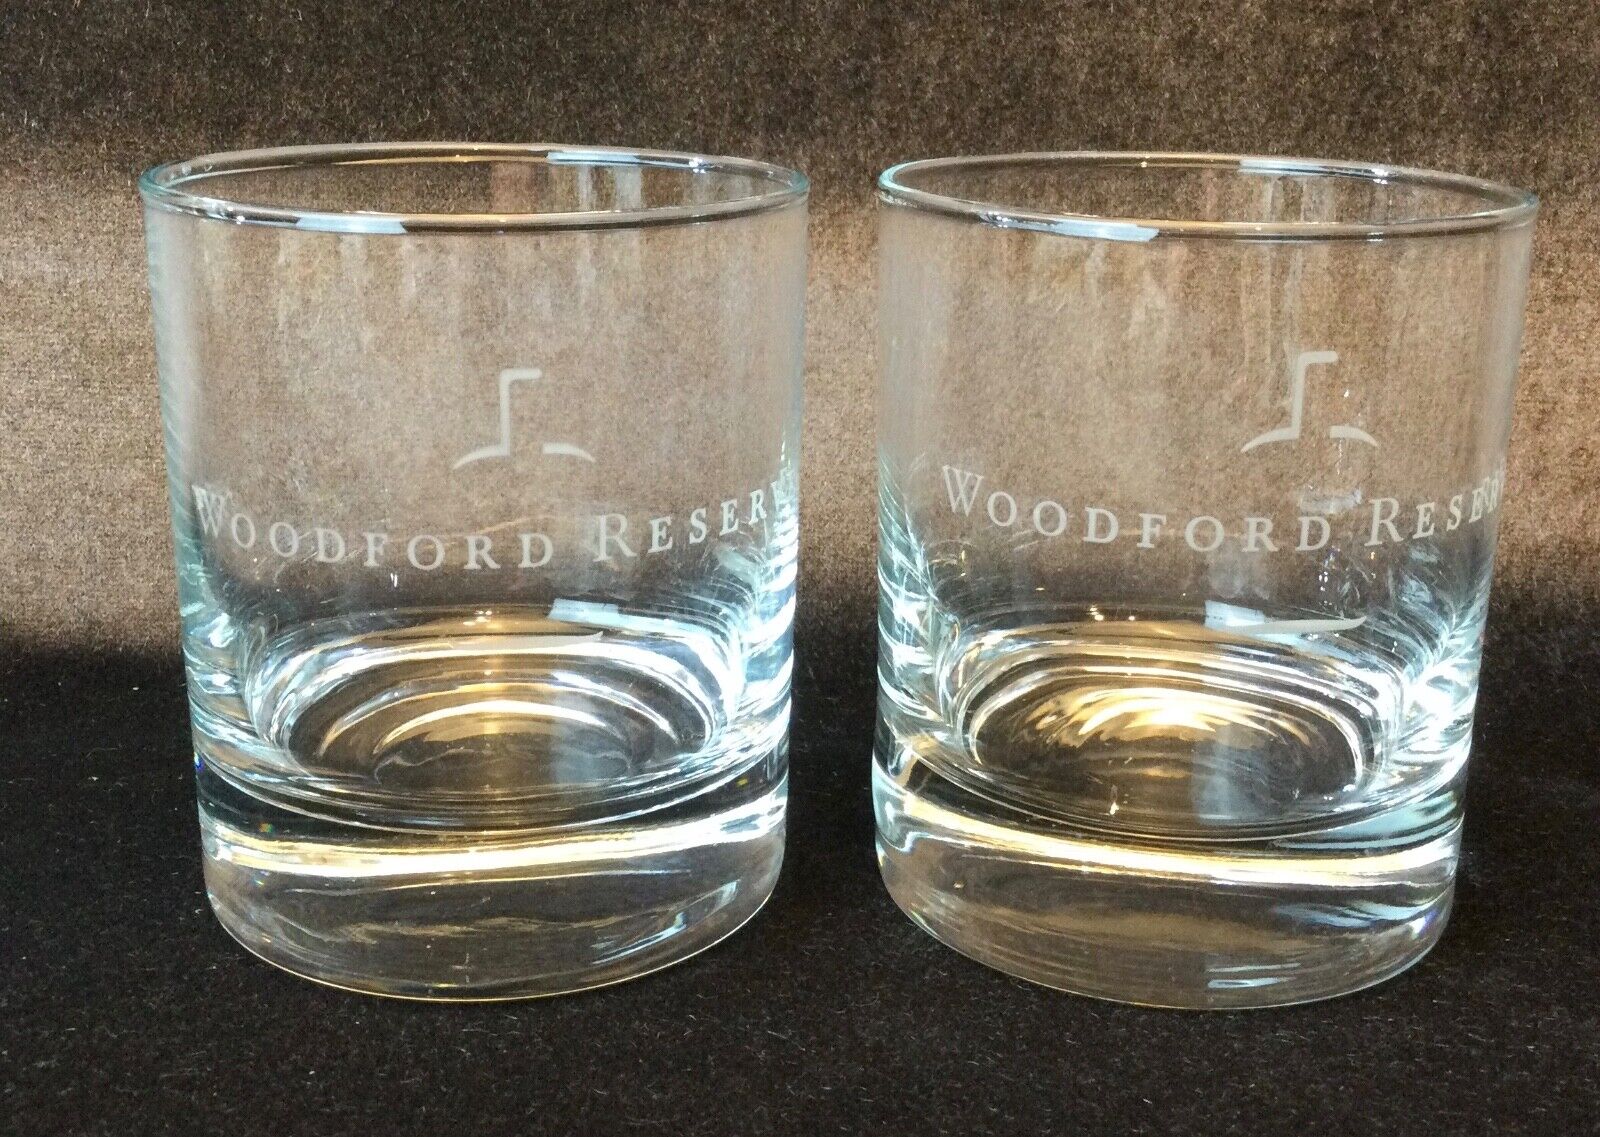 2 Woodford Reserve Bourbon Double Old Fashioned Rock Glasses More Available